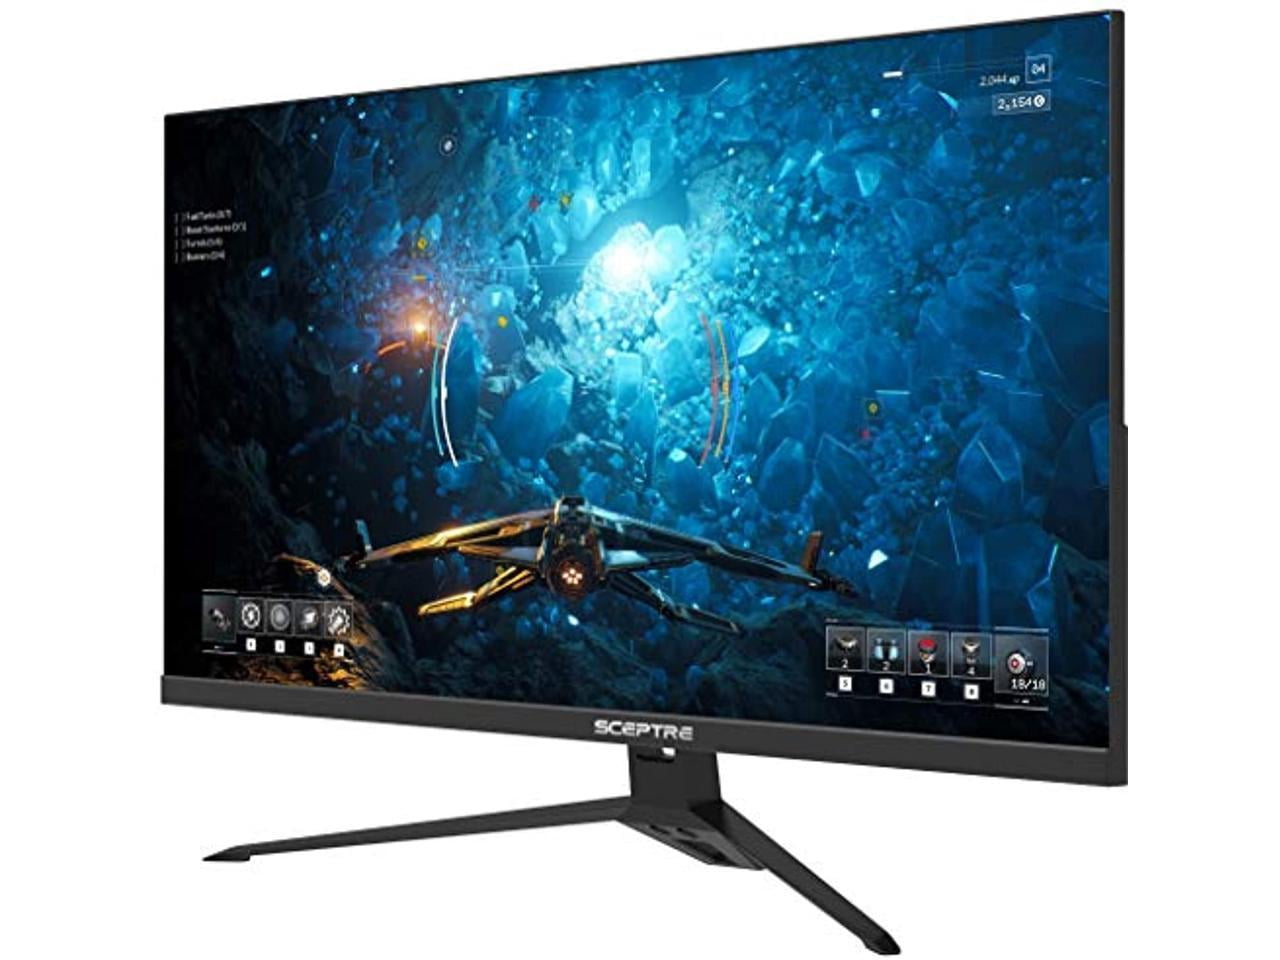 Sceptre 27-inch IPS 2K Gaming Monitor QHD 2560 x 1440p HDR400 up to 165Hz  1ms AMD FreeSync Premium DisplayPort HDMI 100% sRGB, Build-in Speakers